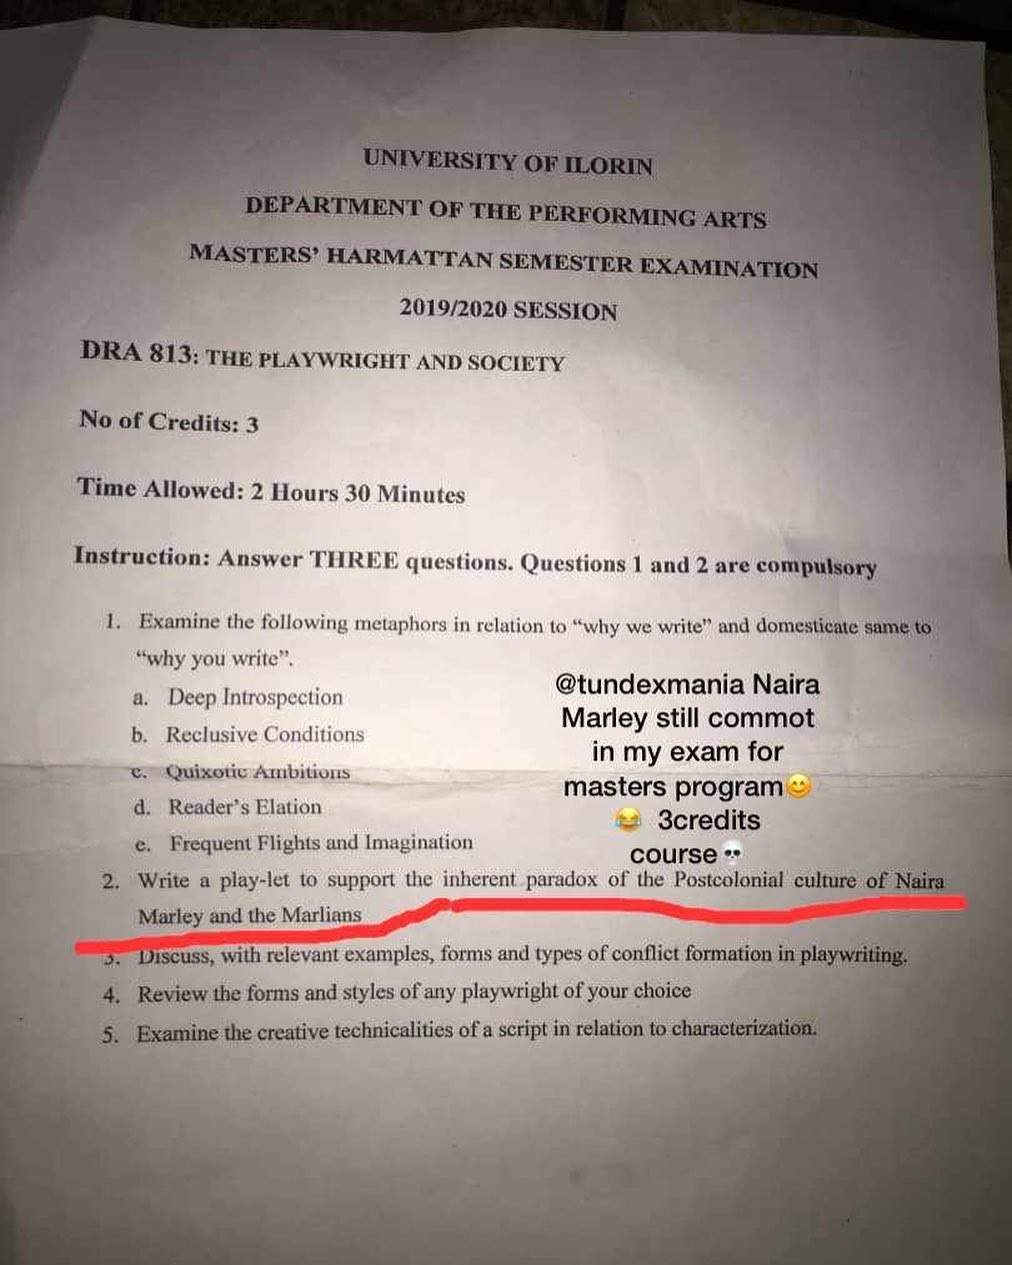 Unilorin professor forces 'Masters students' to answer a question about Naira Marley and the Marlians